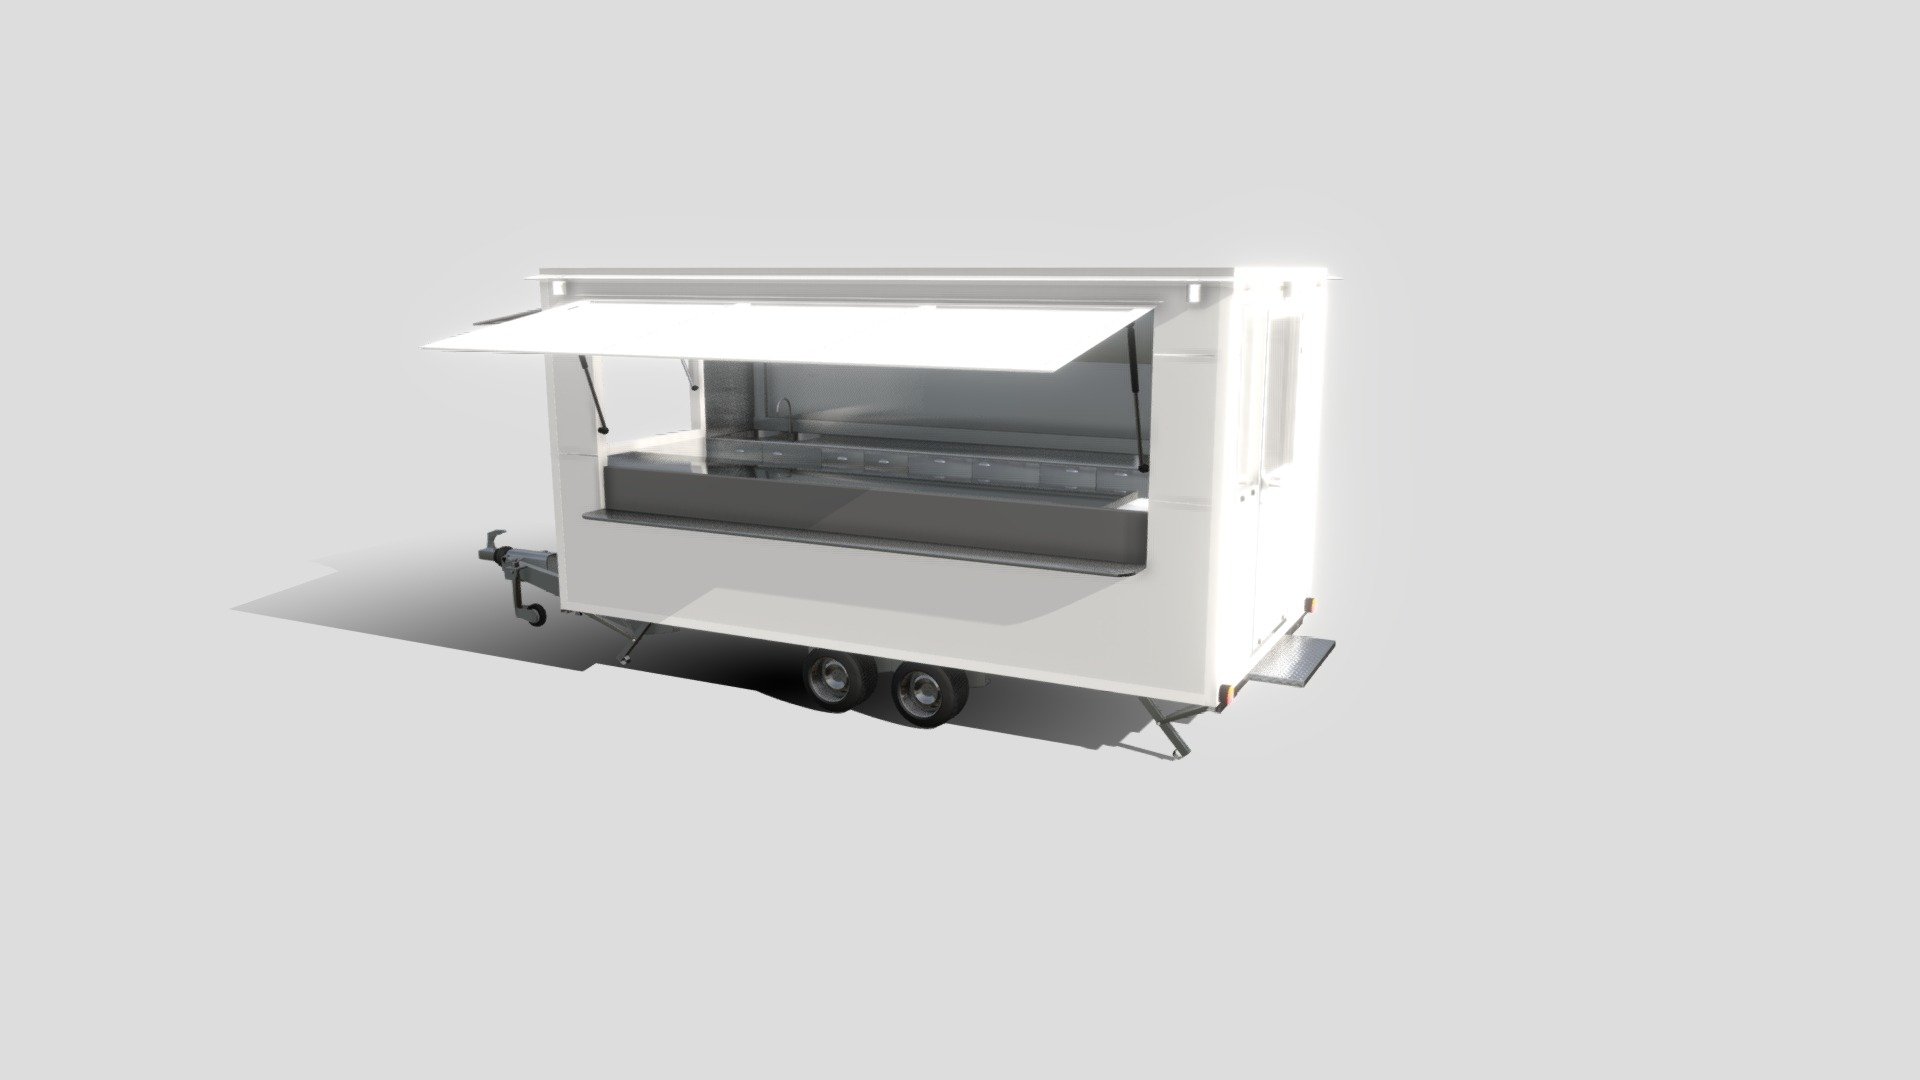 Hello every one! This is our Large food trailer in standard category. We are a construction company and we build food trailer such as this! We are based in Larisa, Greece. We construct our food trailers from the beginning and we deliver to our client! You can find more on our page and on our Youtube cahnnel! Enjoy! Page: https://www.kantines.com/en/ Youtube Channel: https://www.youtube.com/channel/UC9tjeUF84Me9ylLlnX4MHTw - Food trailer Large Category (4.5m x 2.25m) - 3D model by Kantines.com 3d model